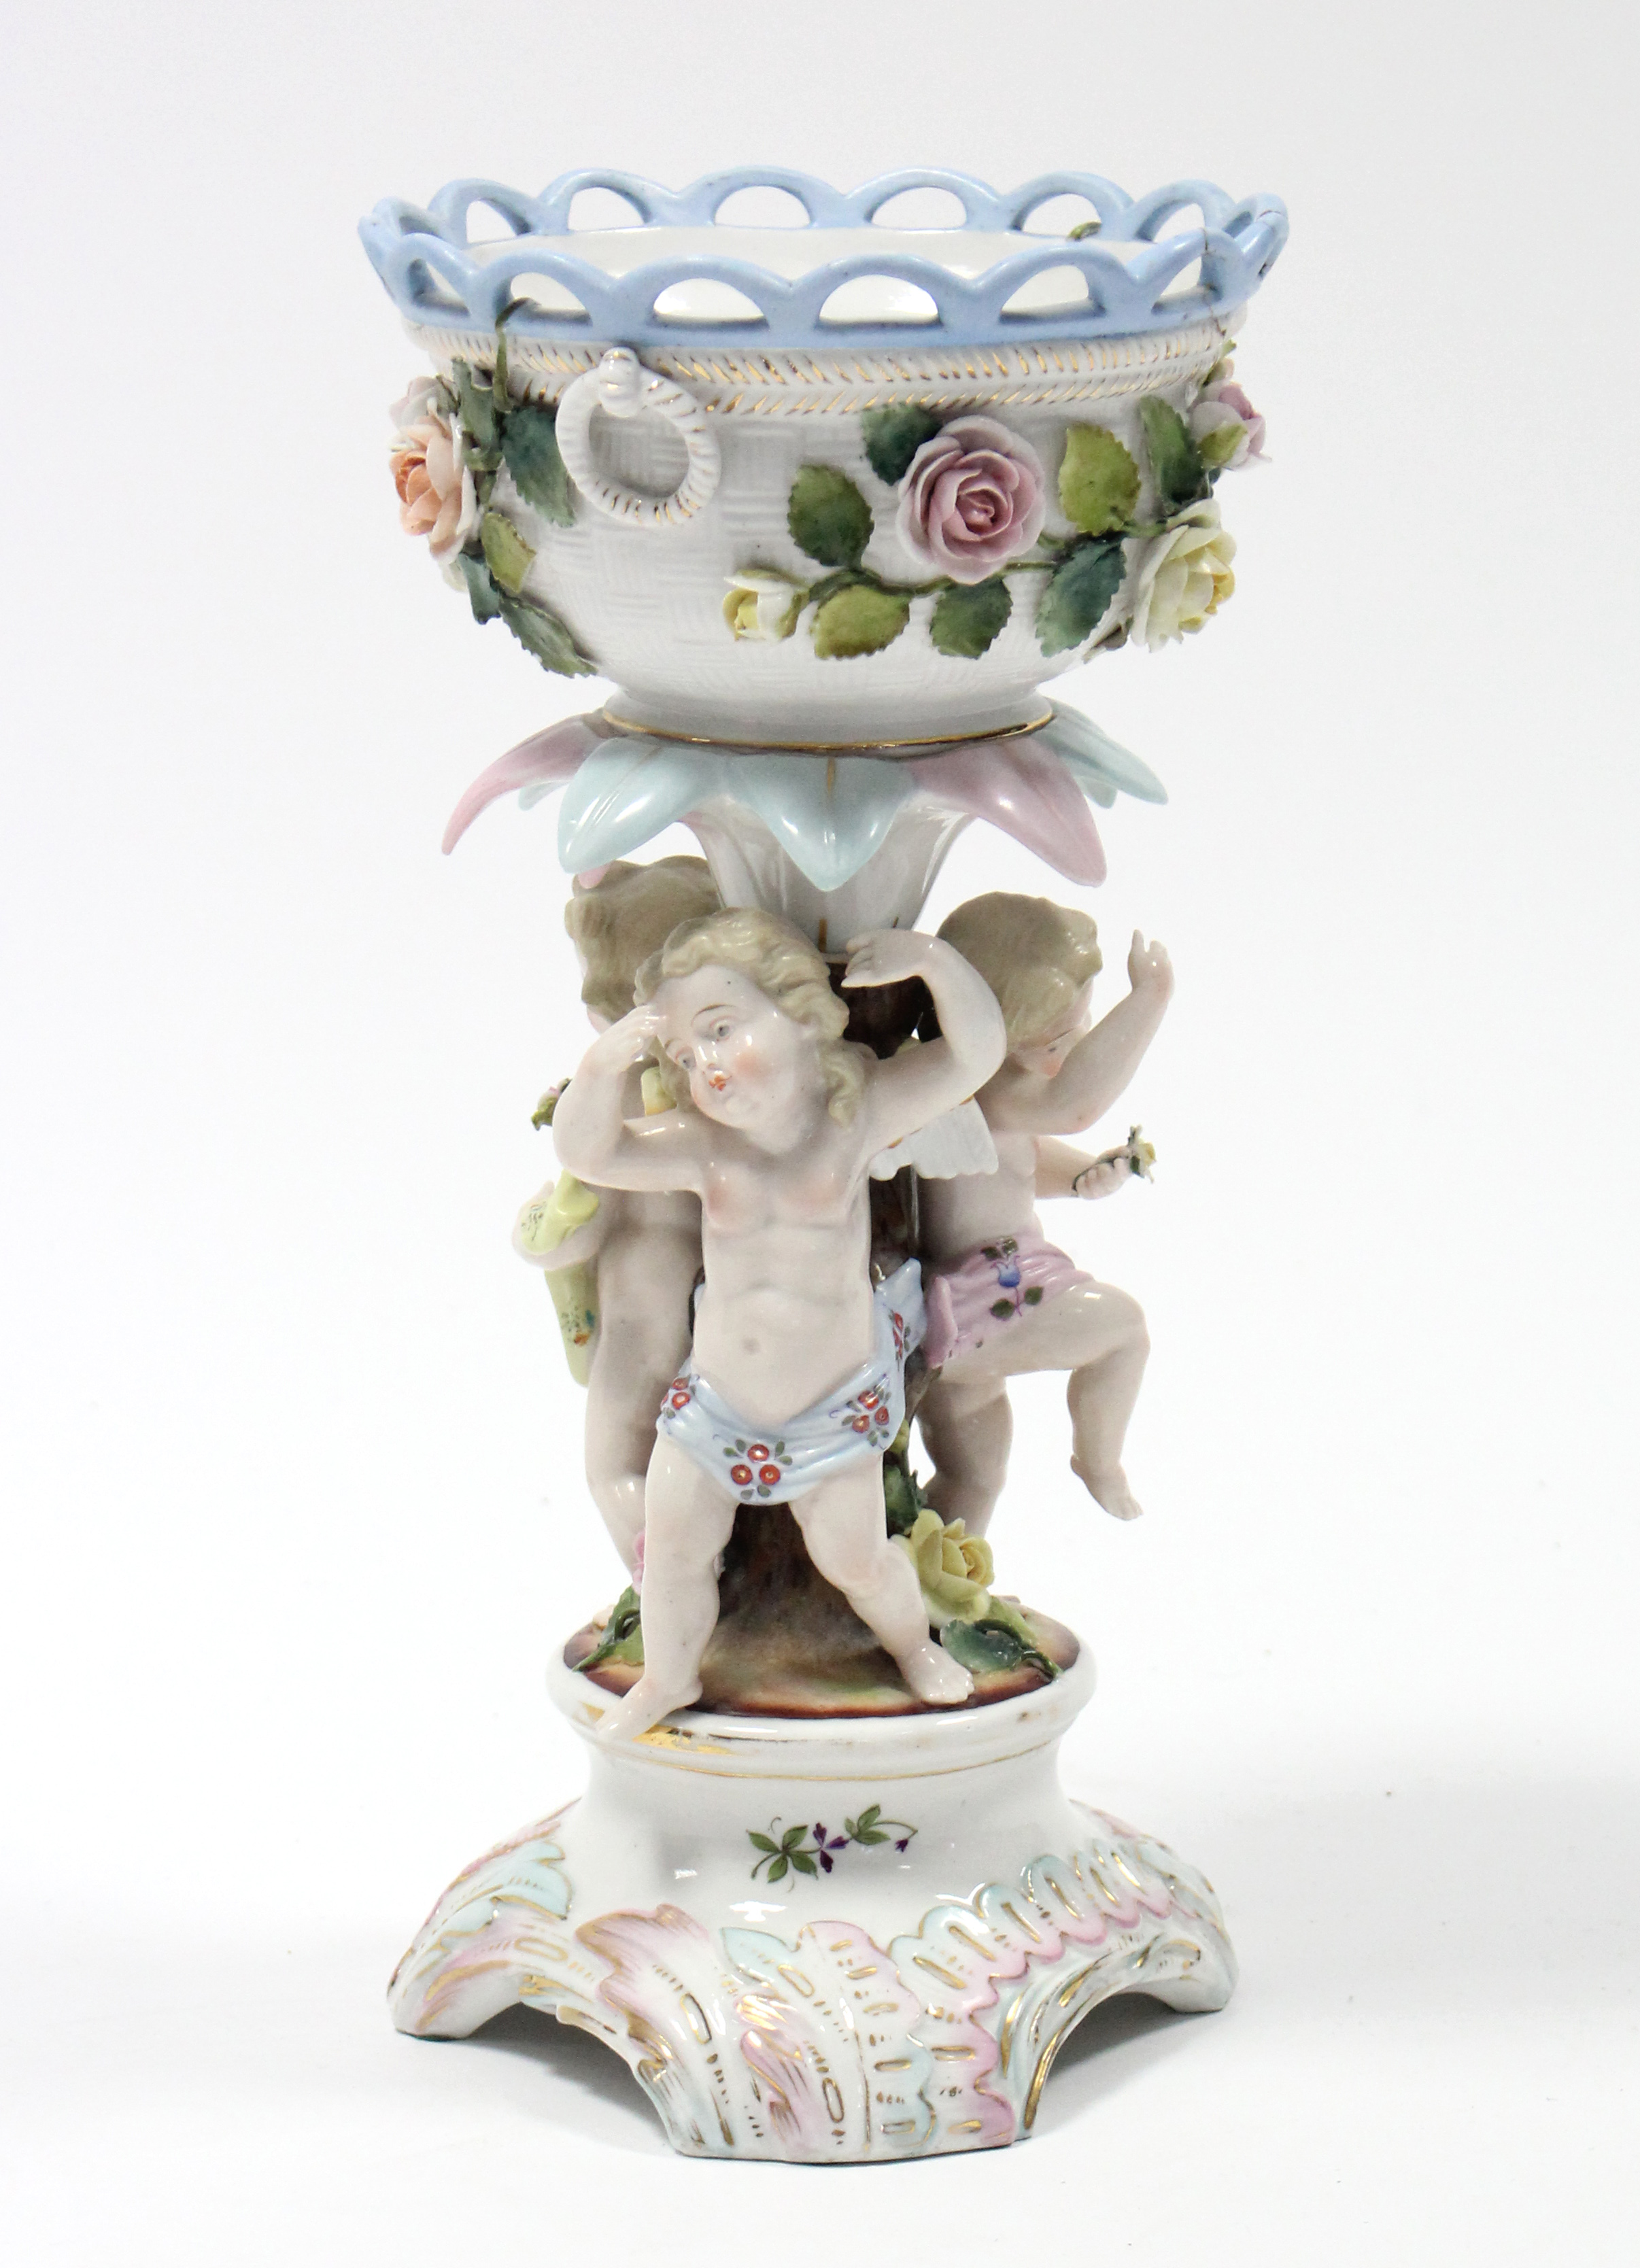 A Sitzendorf porcelain centrepiece with round floral-encrusted bowl supported by three cherubs, on - Image 2 of 3